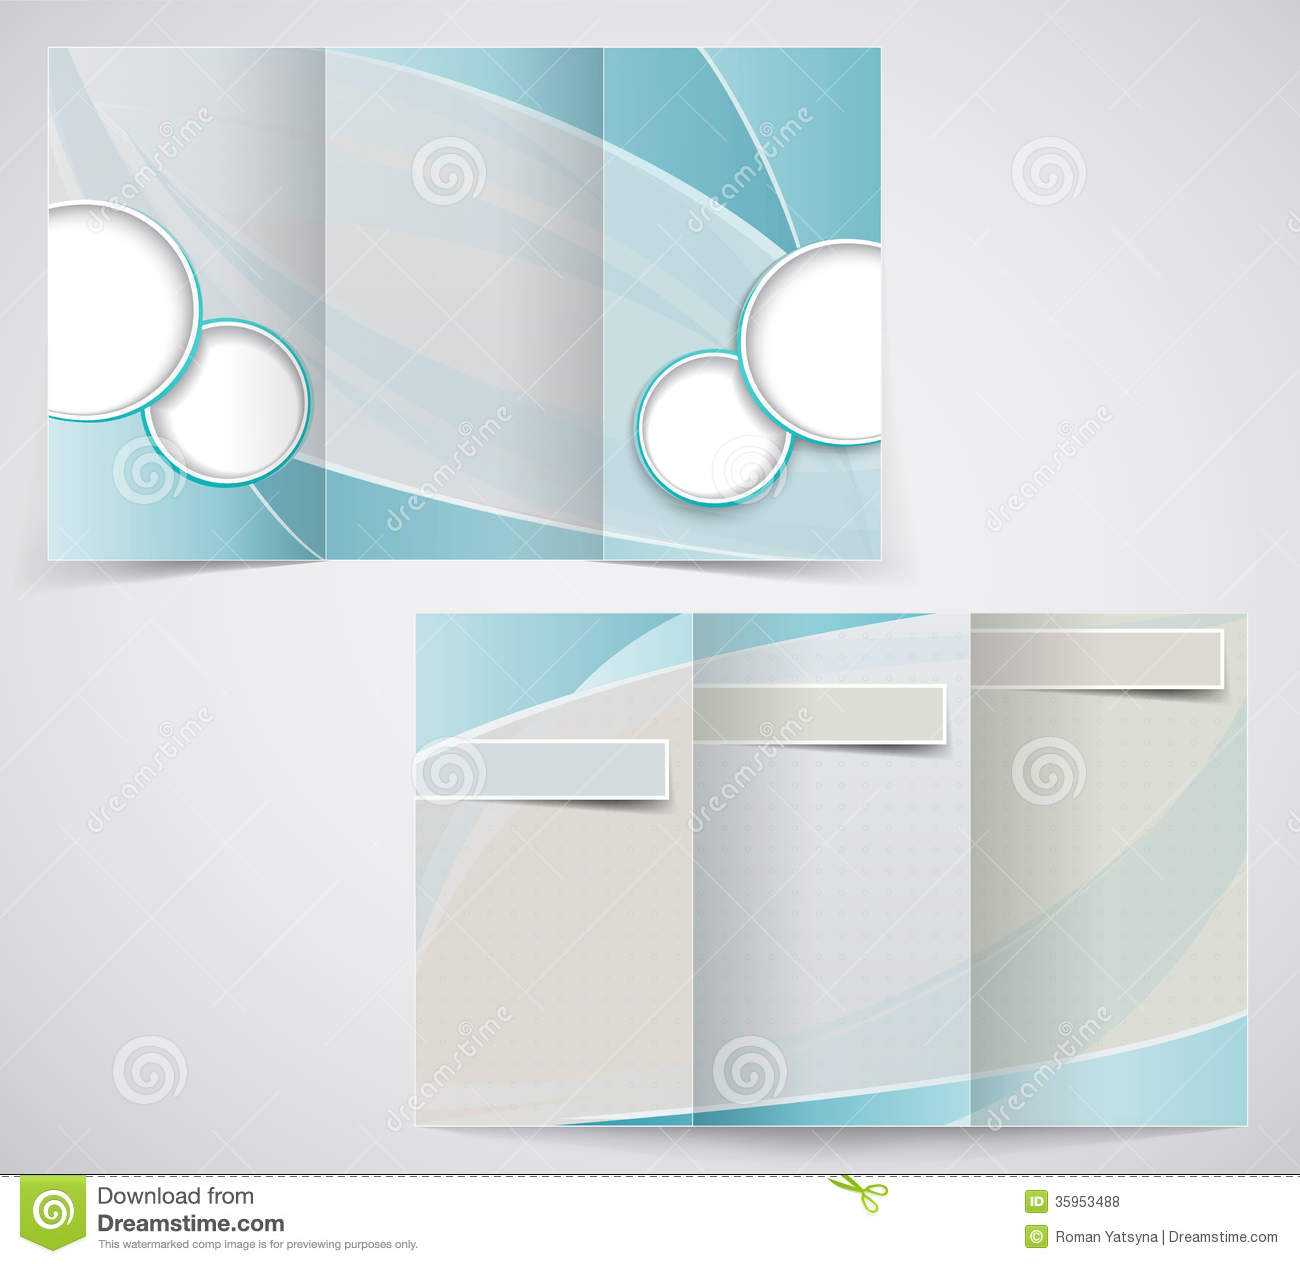 Tri Fold Business Brochure Template, Vector Blue D Stock Intended For Free Illustrator Brochure Templates Download